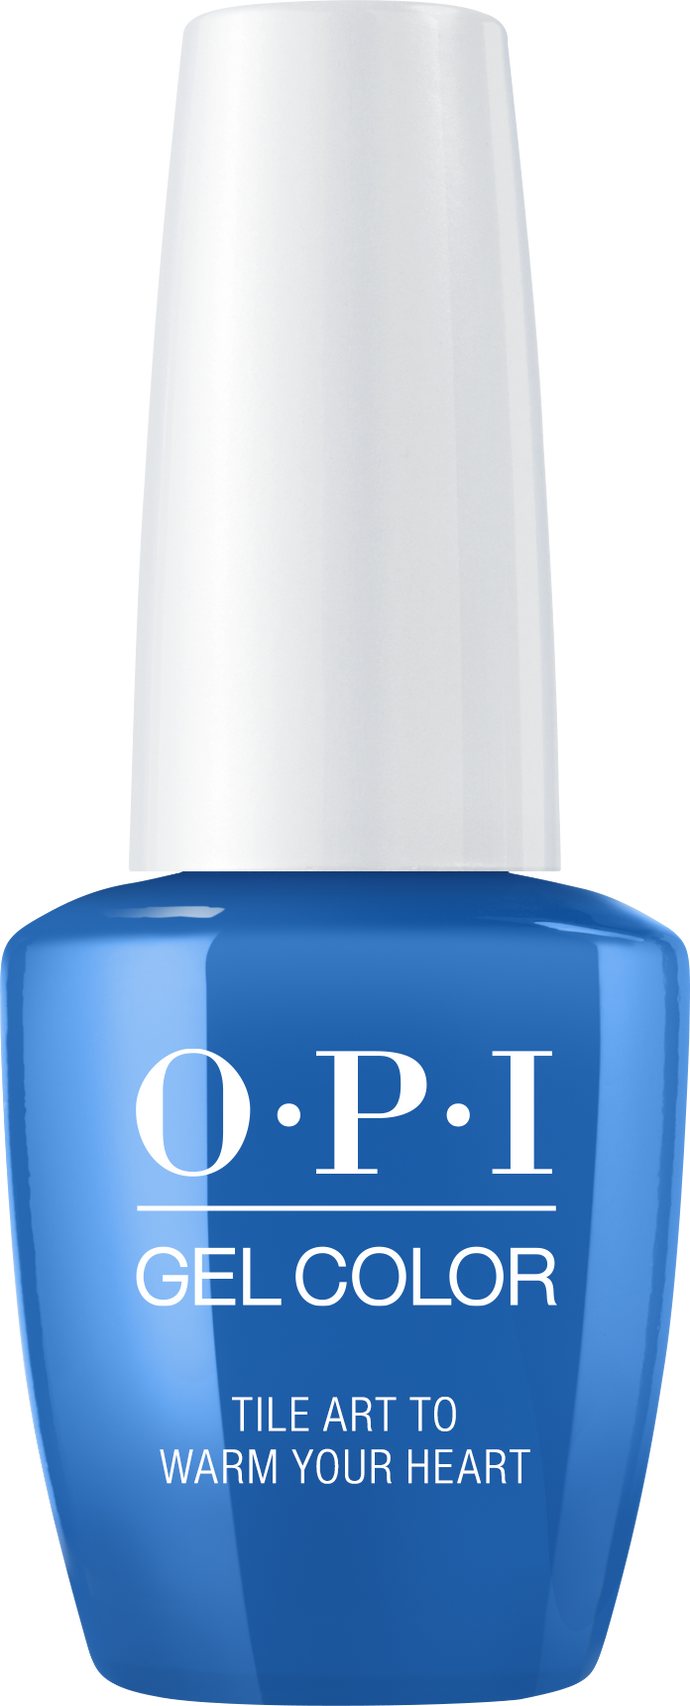 OPI OPI GelColor - Tile Art to Warm Your Heart 0.5 oz - #GCL25 - Sleek Nail